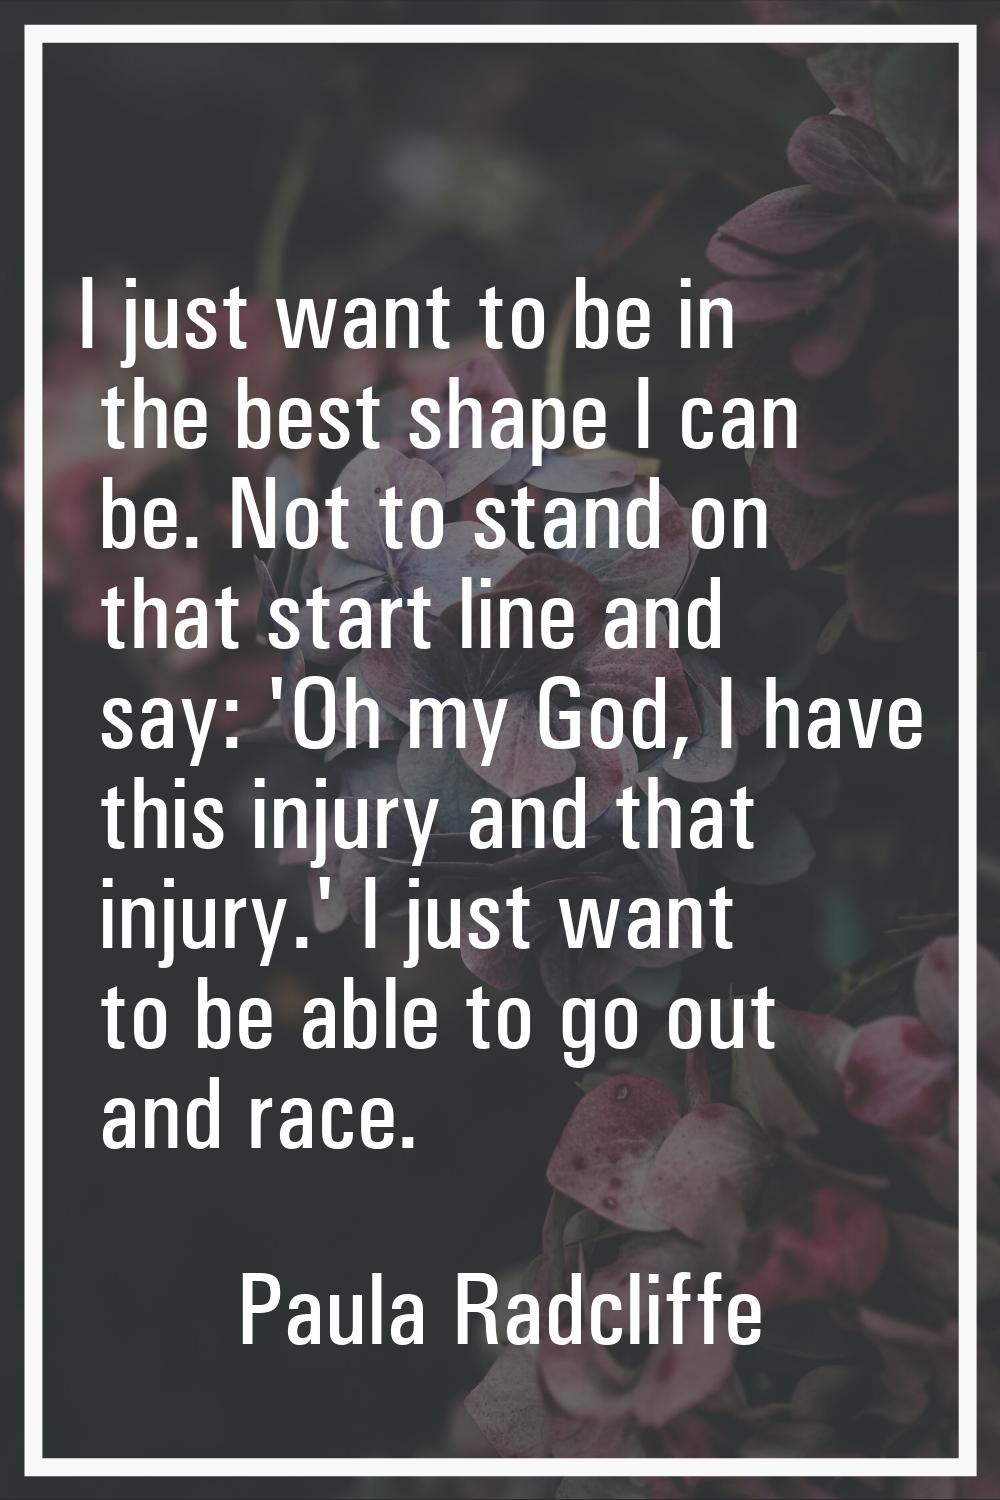 I just want to be in the best shape I can be. Not to stand on that start line and say: 'Oh my God, 